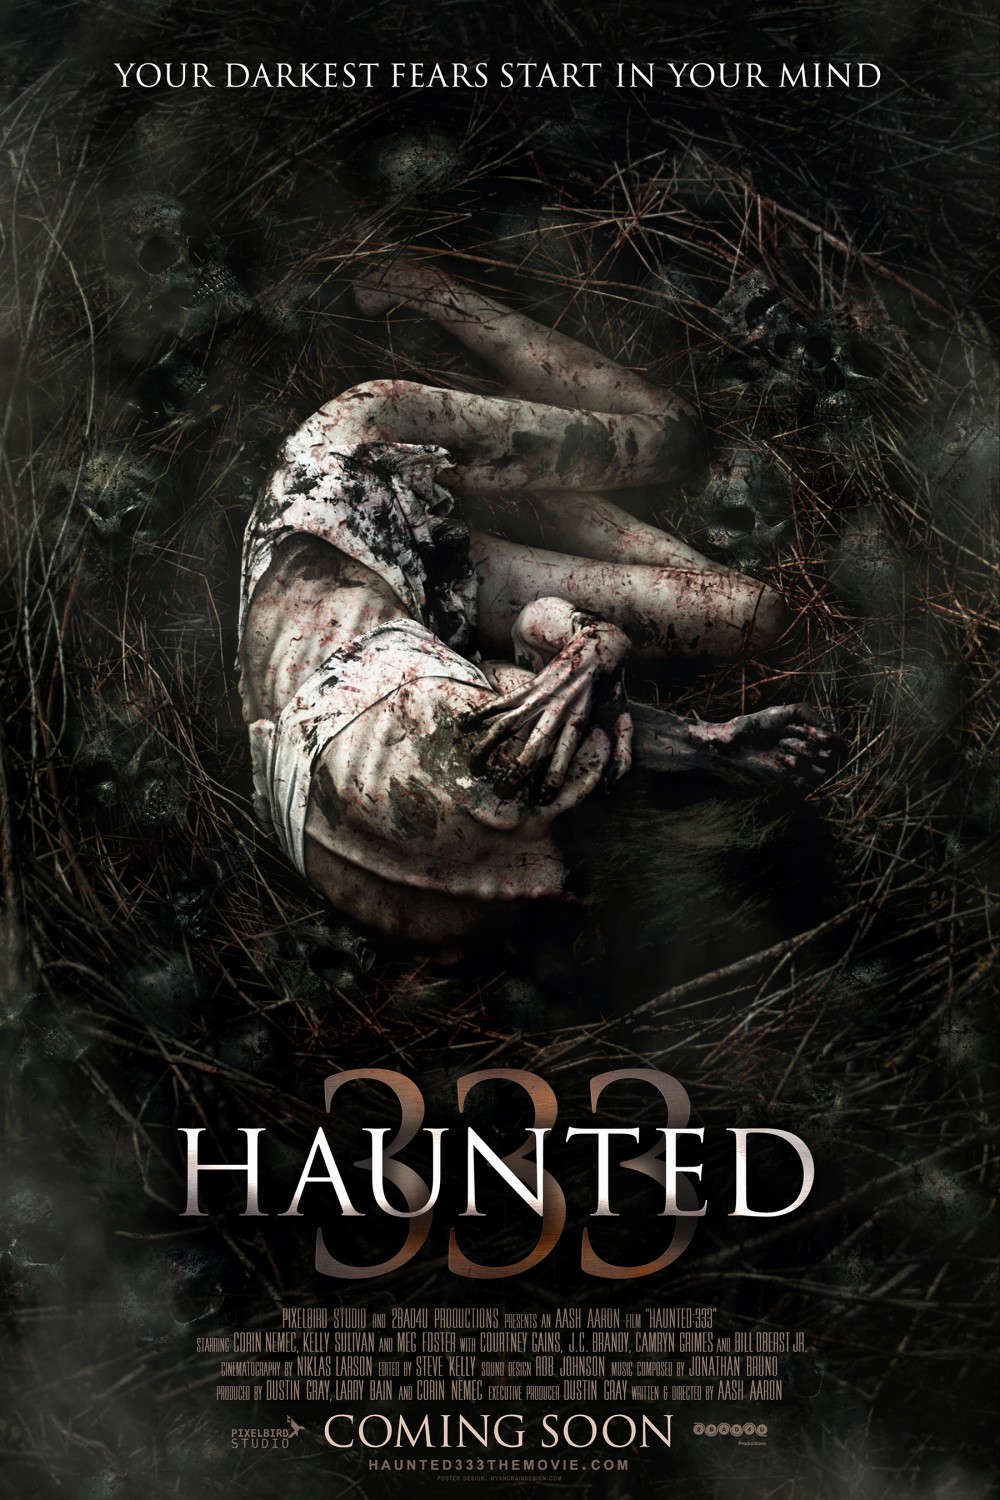 Extra Large Movie Poster Image for Haunted: 333 